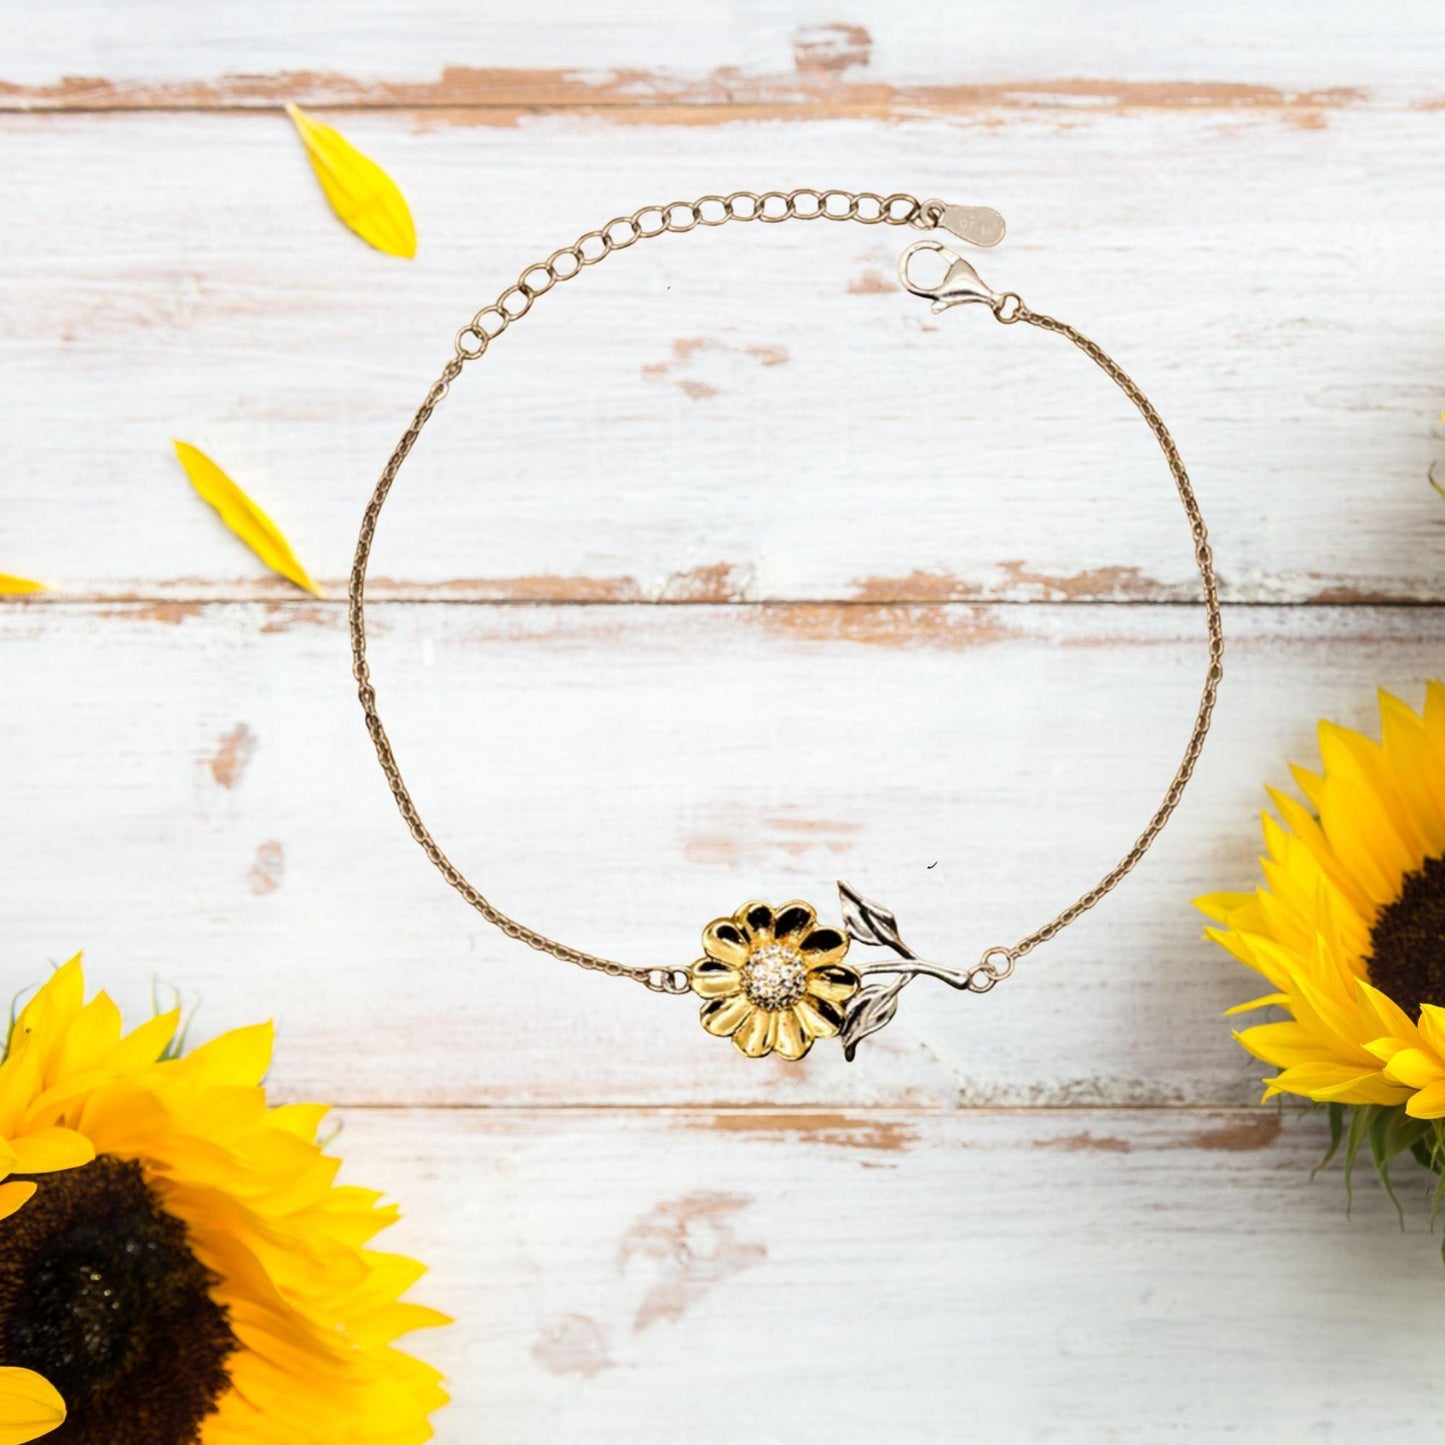 Motivational Godson Sunflower Bracelet - I can promise to love you for the rest of my life, Birthday, Christmas Holiday Jewelry Gift - Mallard Moon Gift Shop